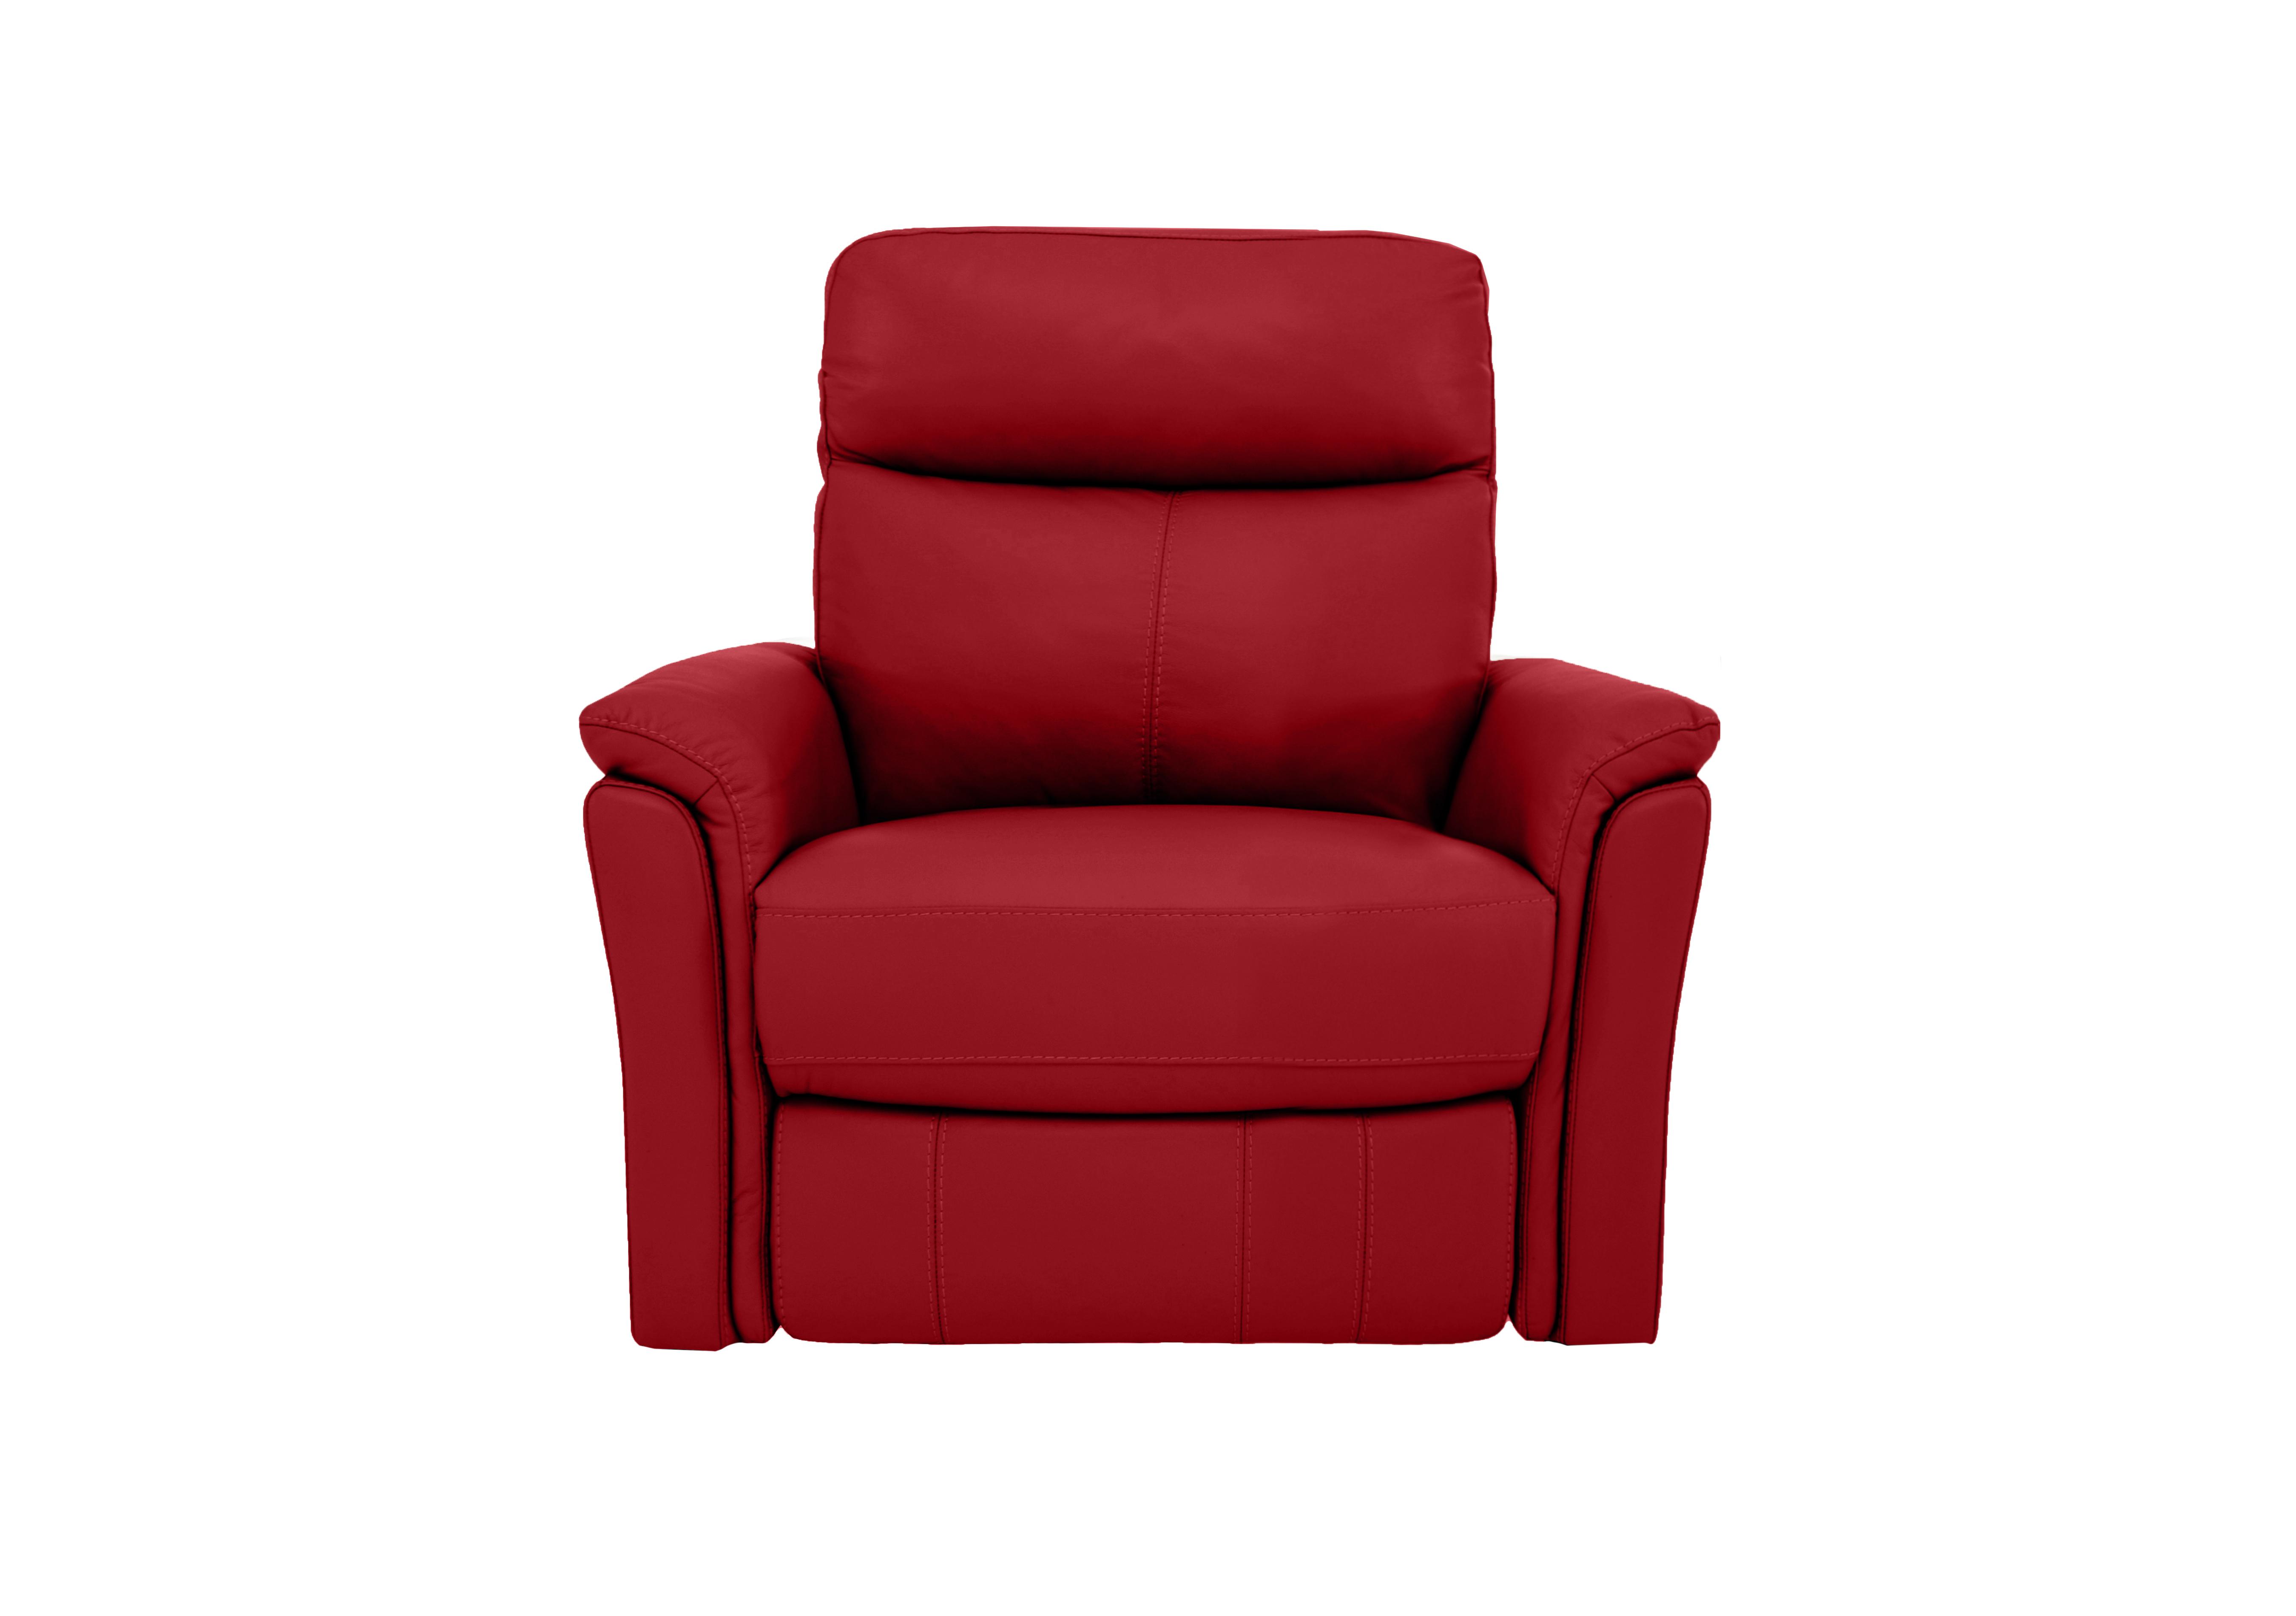 Compact Collection Piccolo Recliner Armchair in Bv-0008 Pure Red on Furniture Village